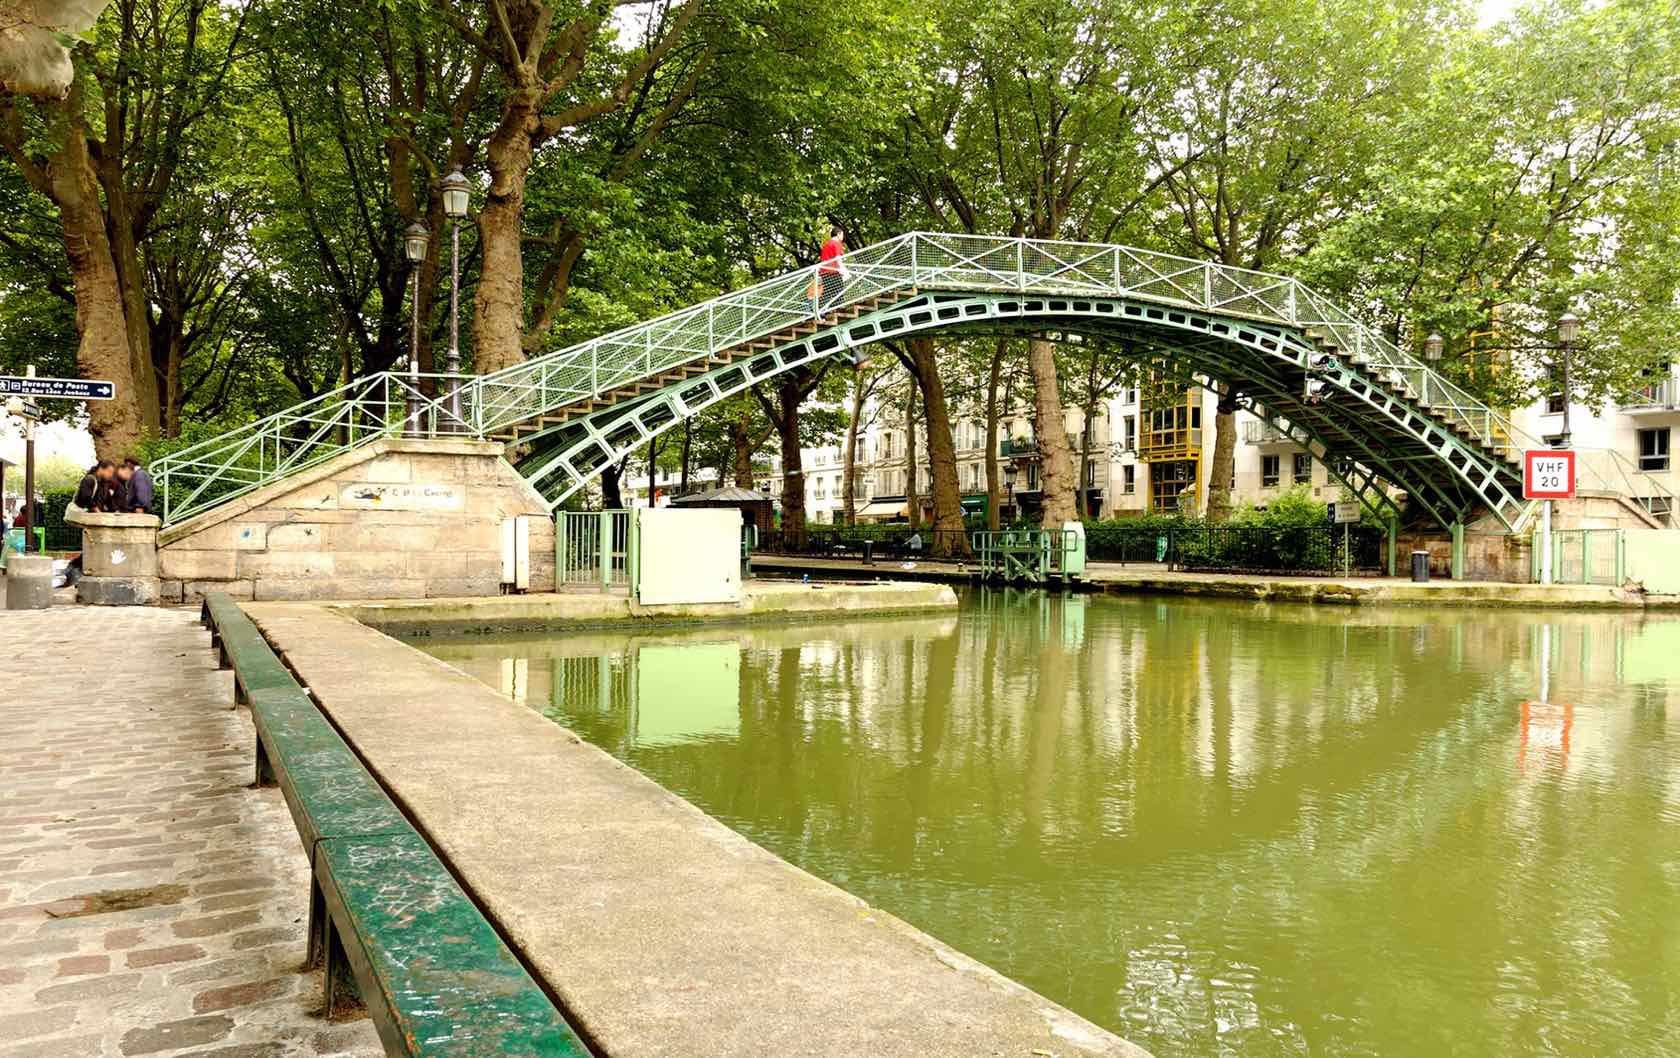 10 of the Best Places to Picnic in Paris by Paris Perfect Canal Saint-Martin